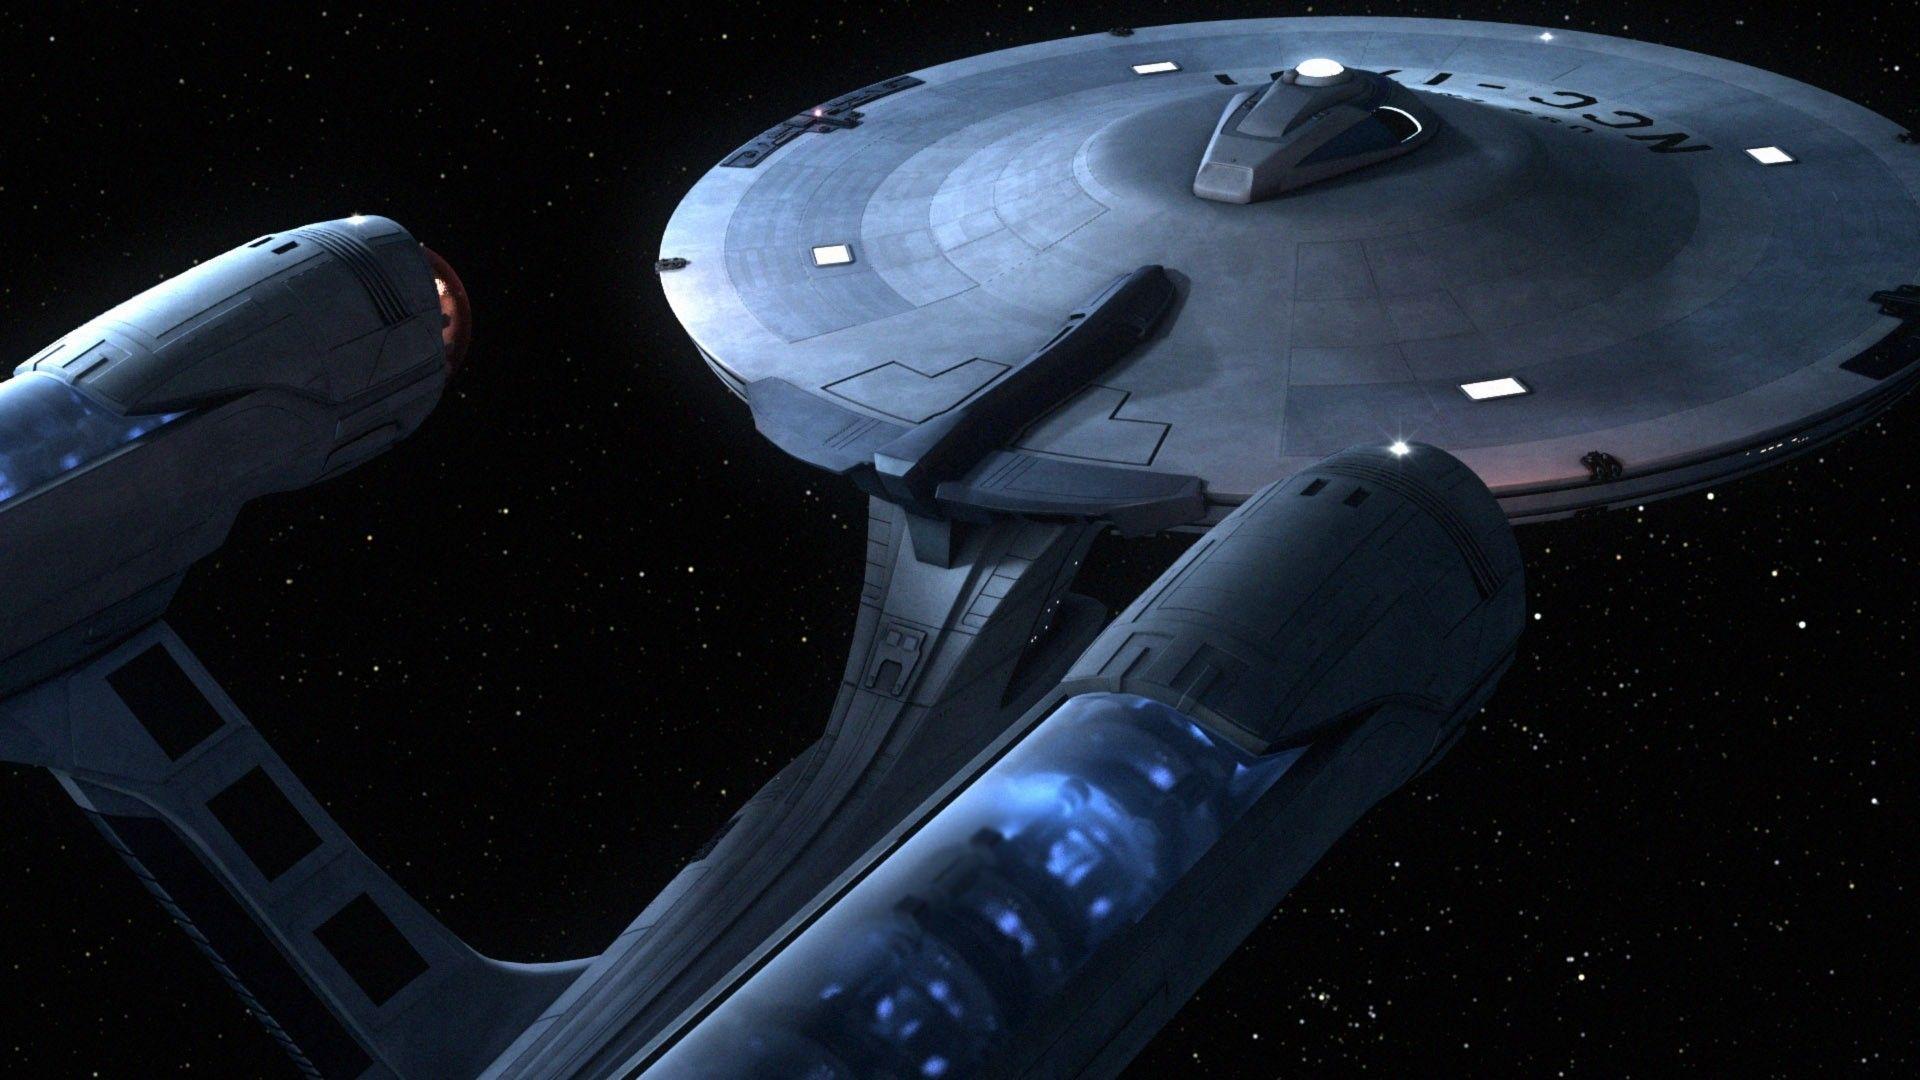 Starship Wallpapers Top Free Starship Backgrounds Wallpaperaccess Images, Photos, Reviews